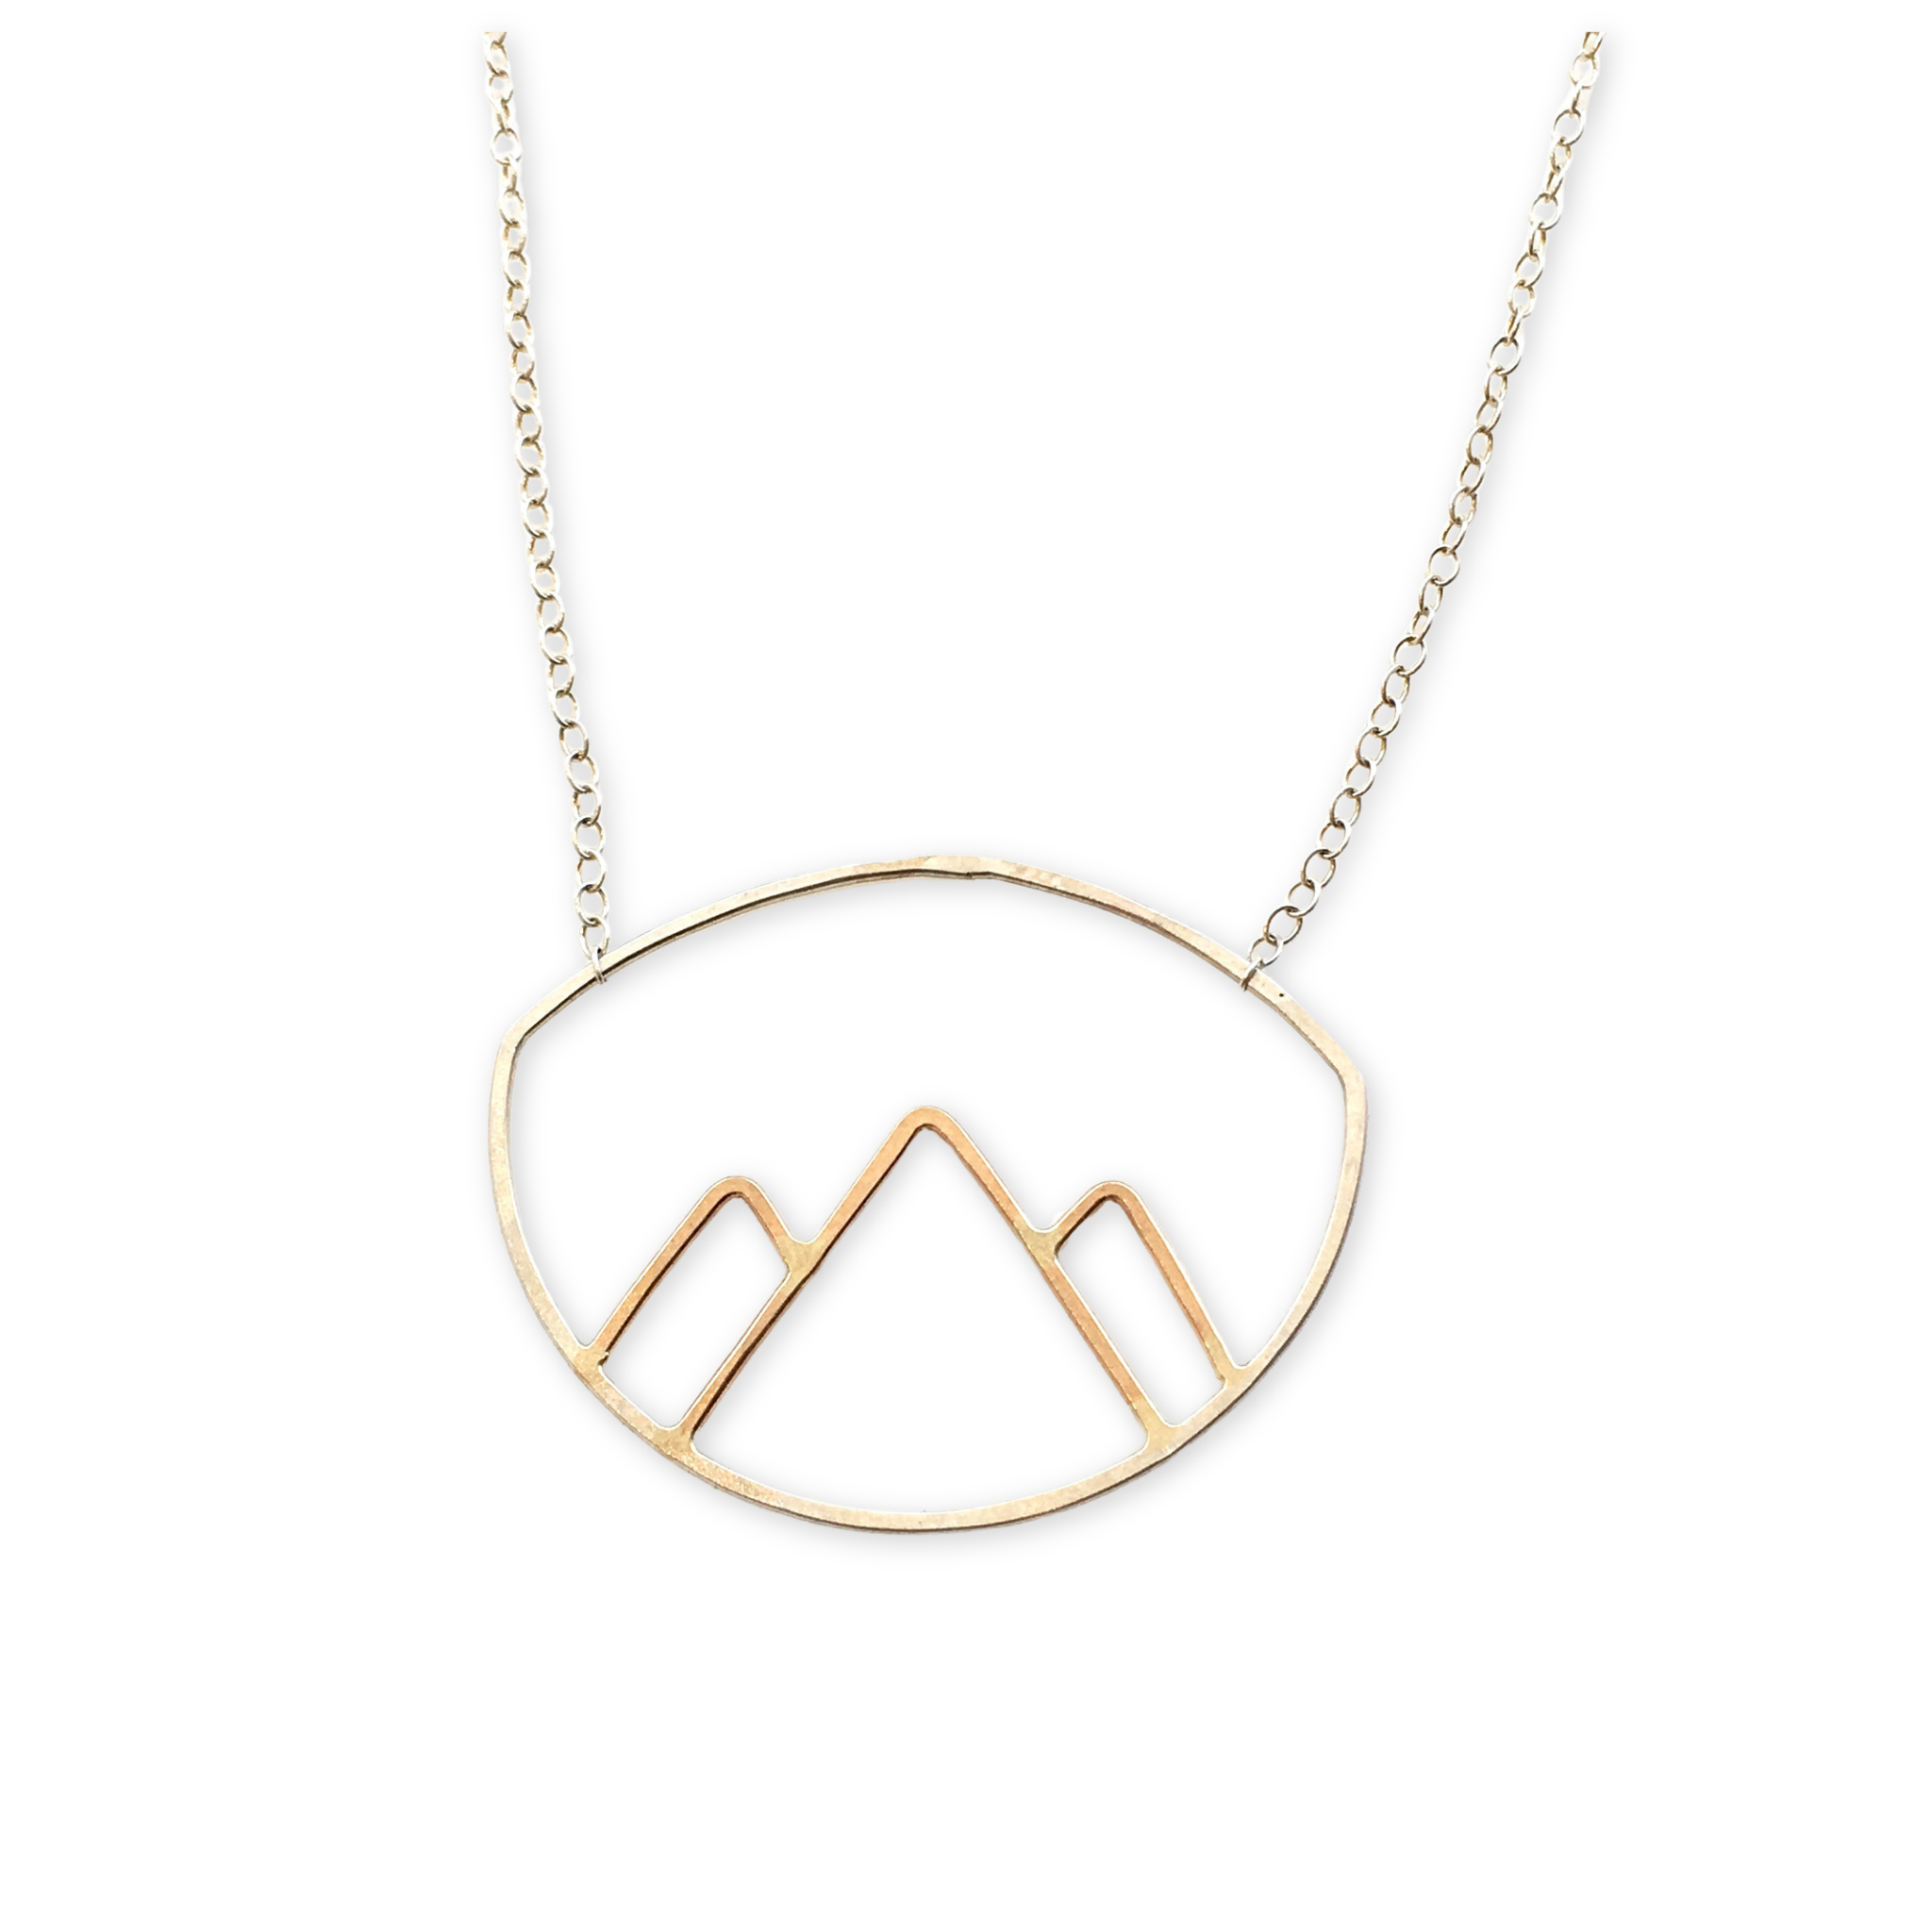 necklace with hammered mountain range